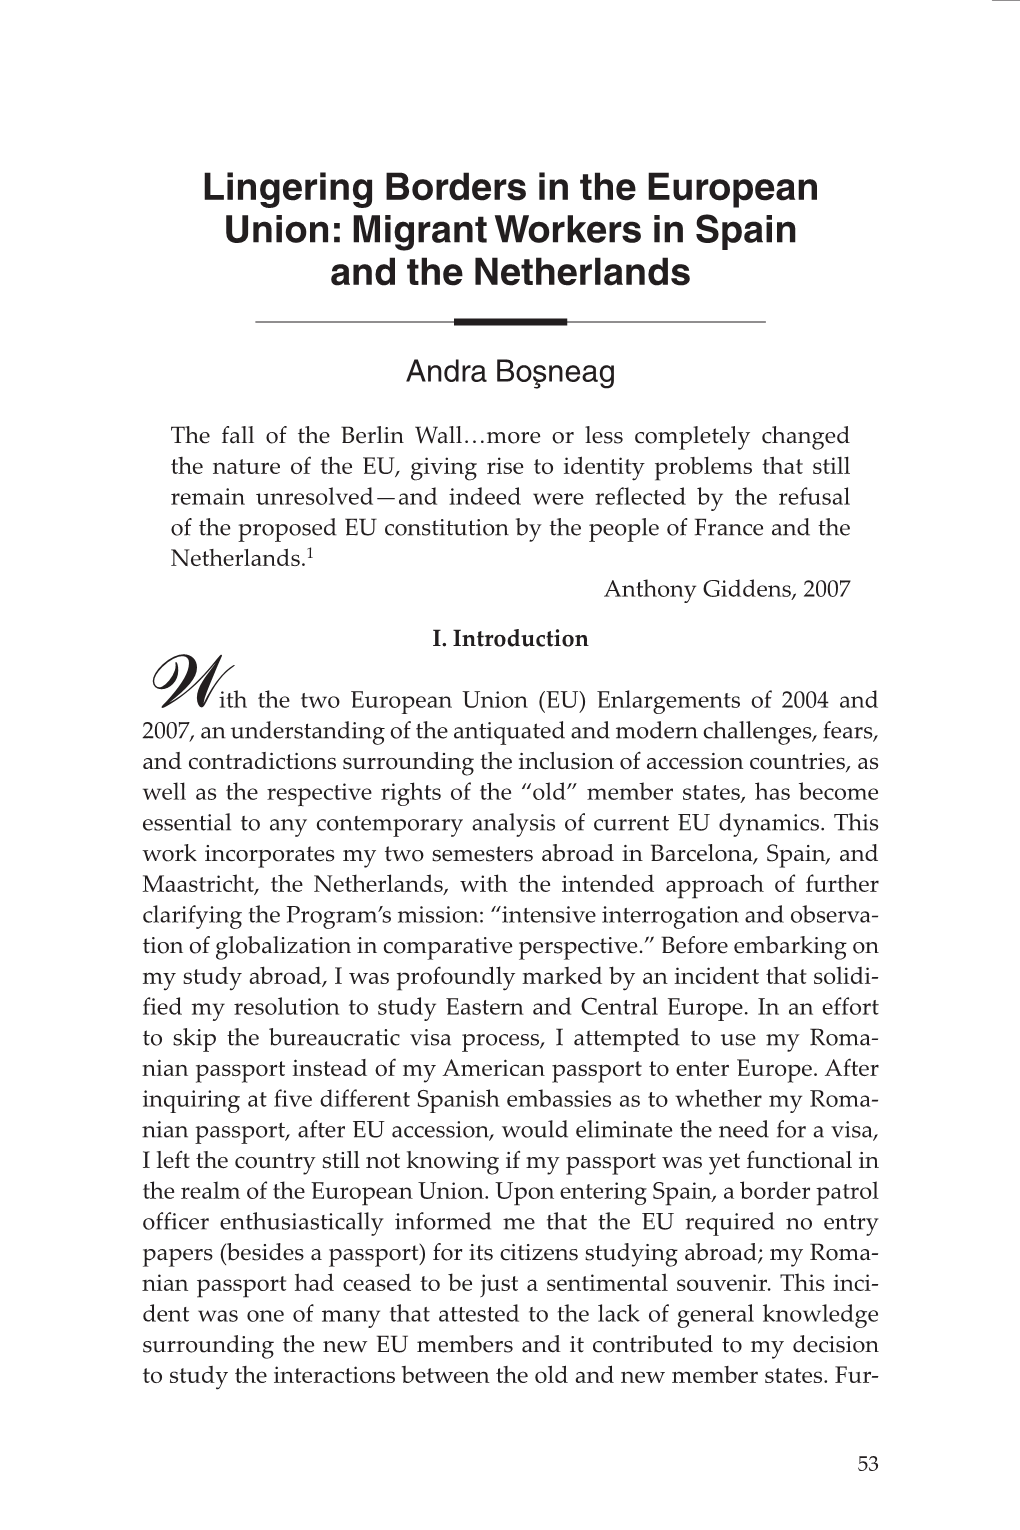 Lingering Borders in the European Union: Migrant Workers in Spain and the Netherlands